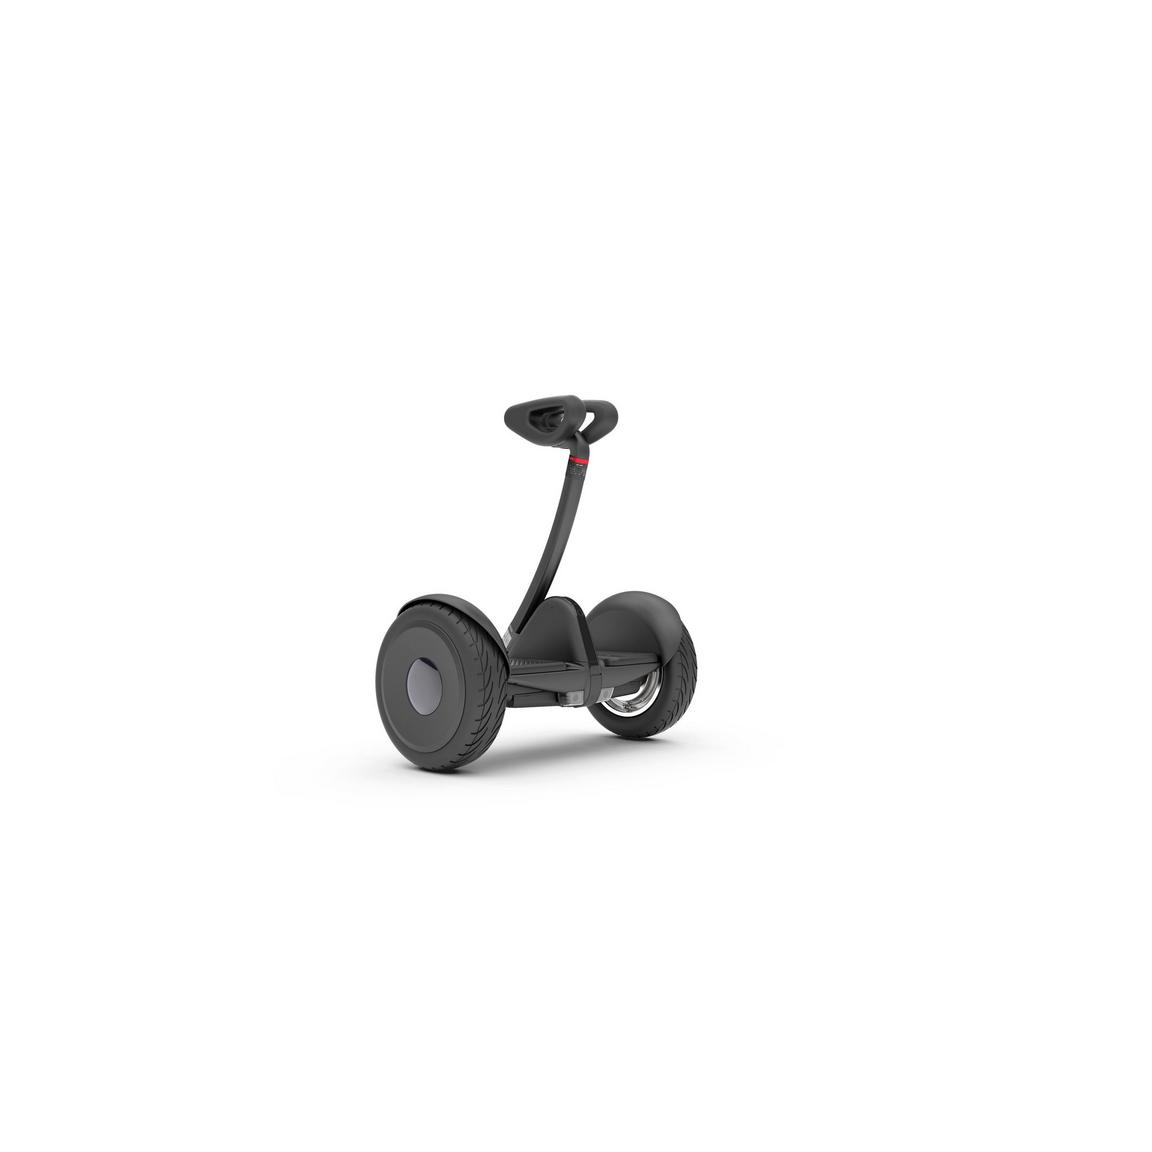 Segway Ninebot S Electric Scooter Black